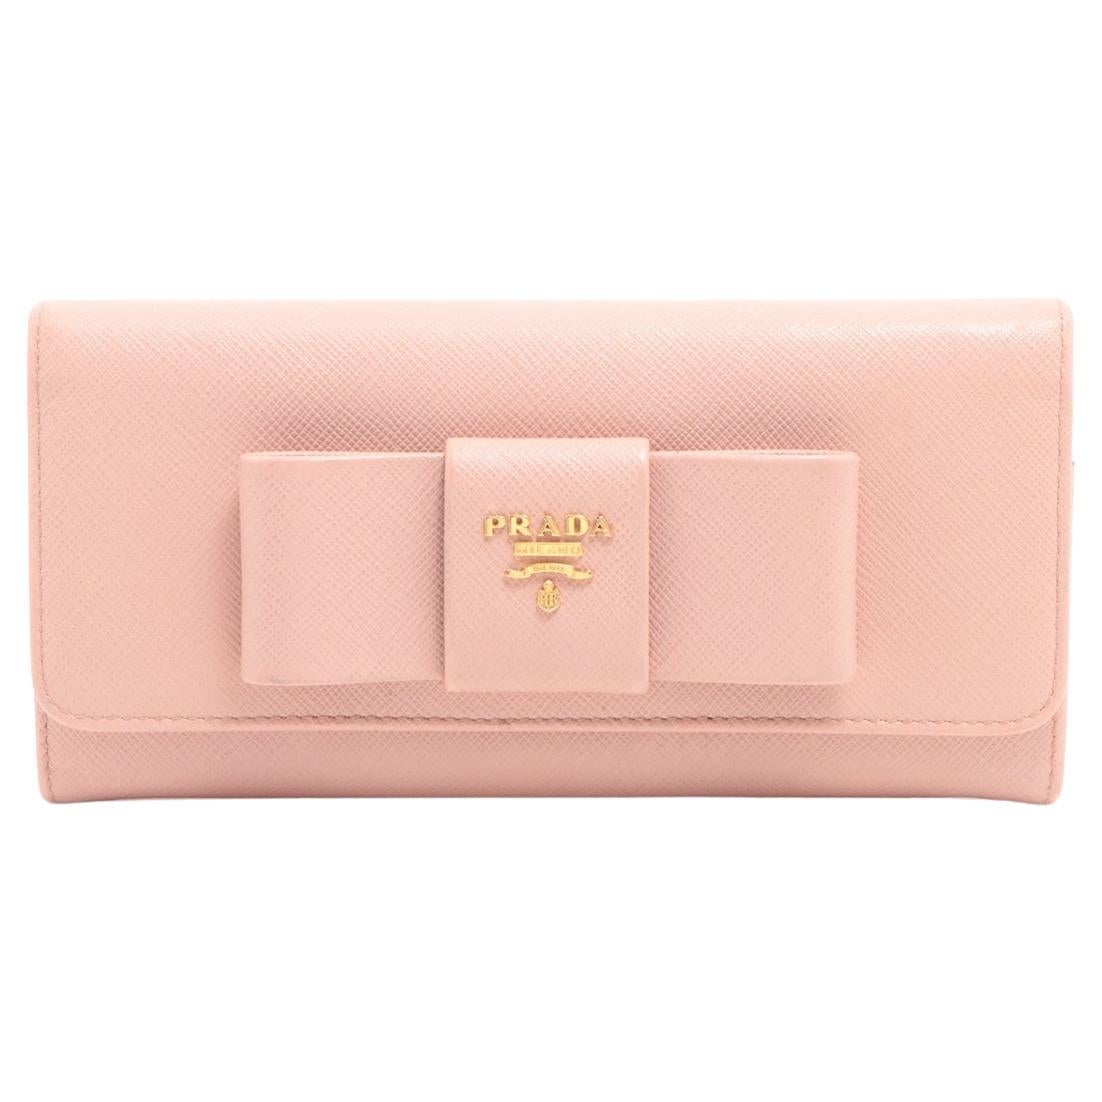 Prada Ribbon Saffiano Leather Wallet Pink For Sale